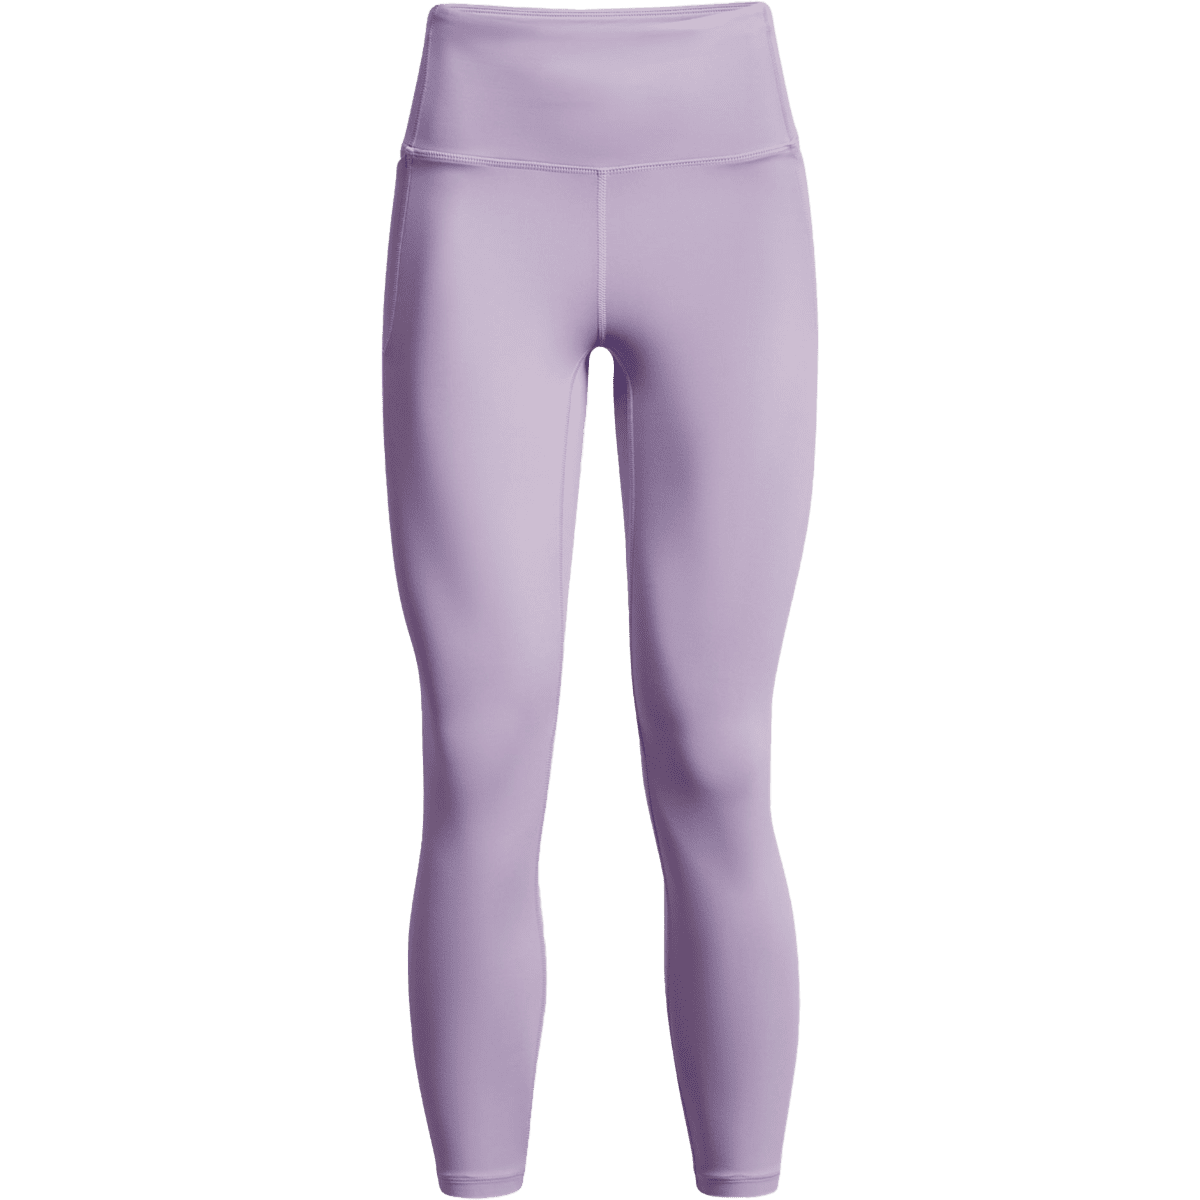 Under Armour Meridian Cold Weather leggings in purple